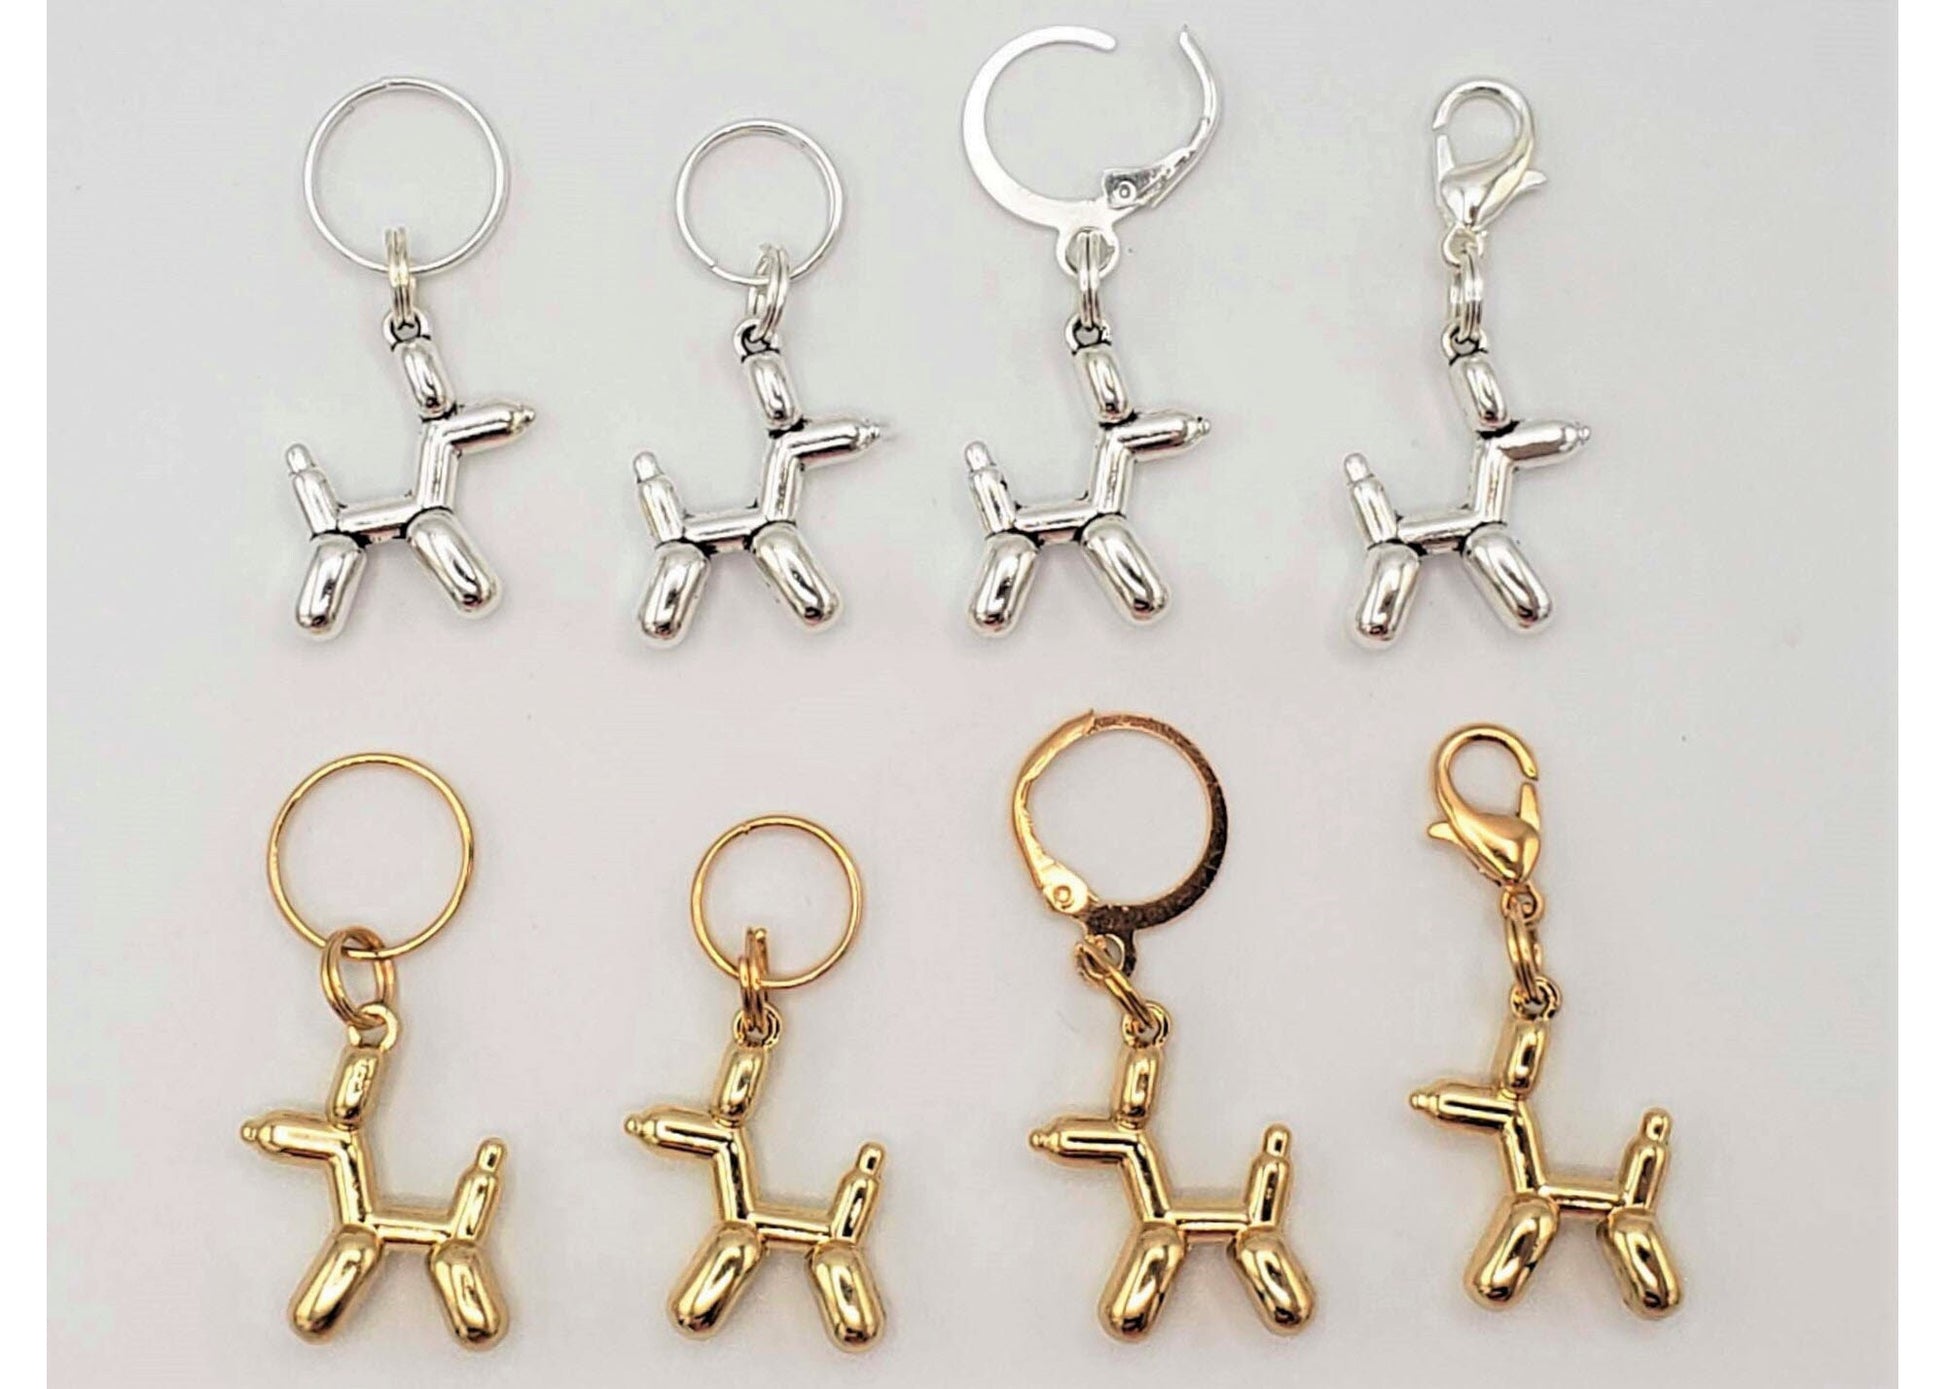 Stitch Markers for Knitting, 4pc 3D Balloon Dog, Gold and Silver charms | Crochet progress keeper, project bag charms, crochet accessories